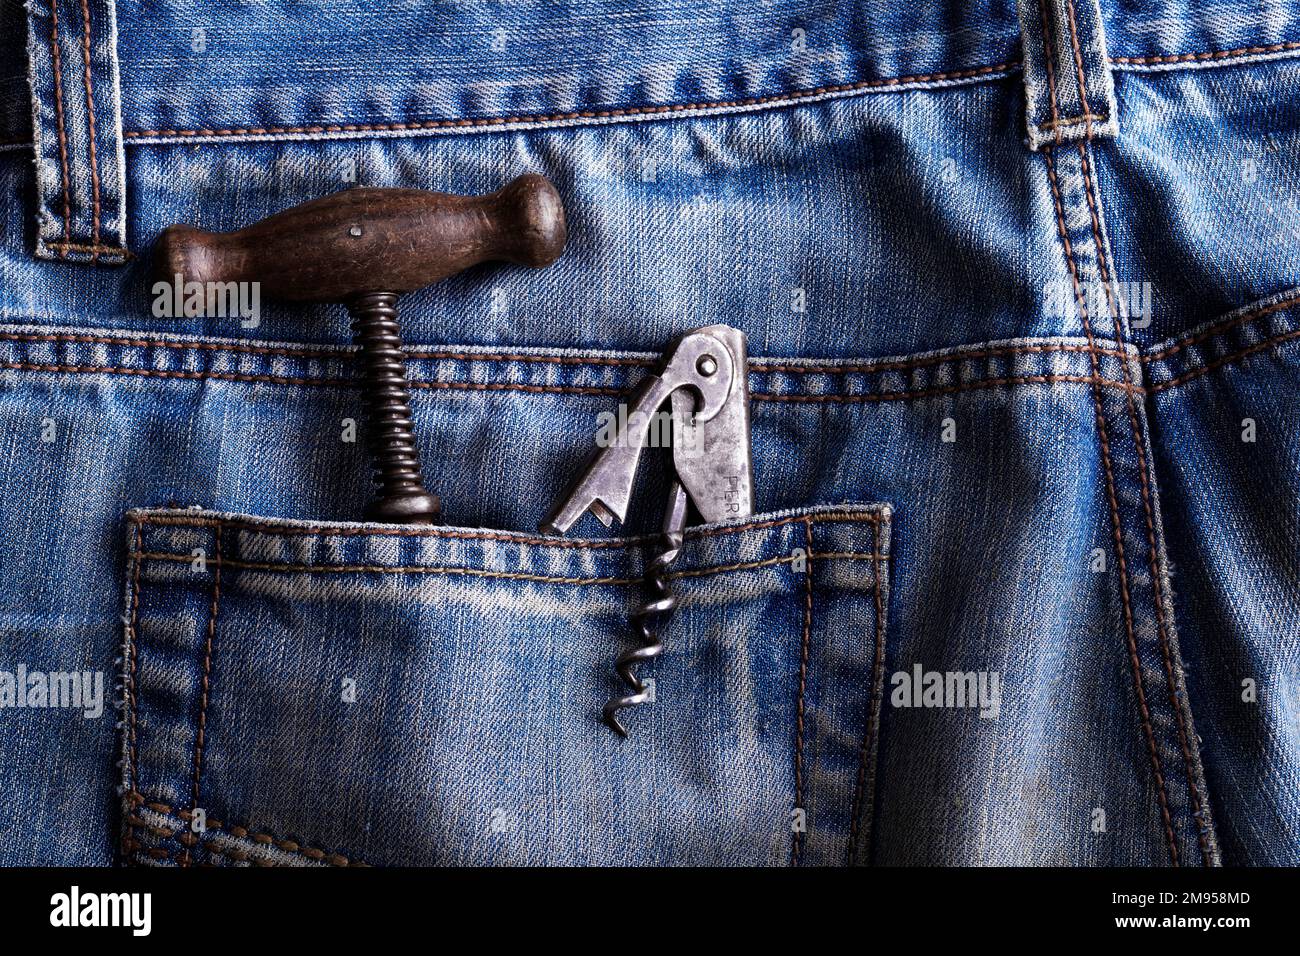 old corkscrew and bottle opener in a back pocket of blue jeans Stock Photo